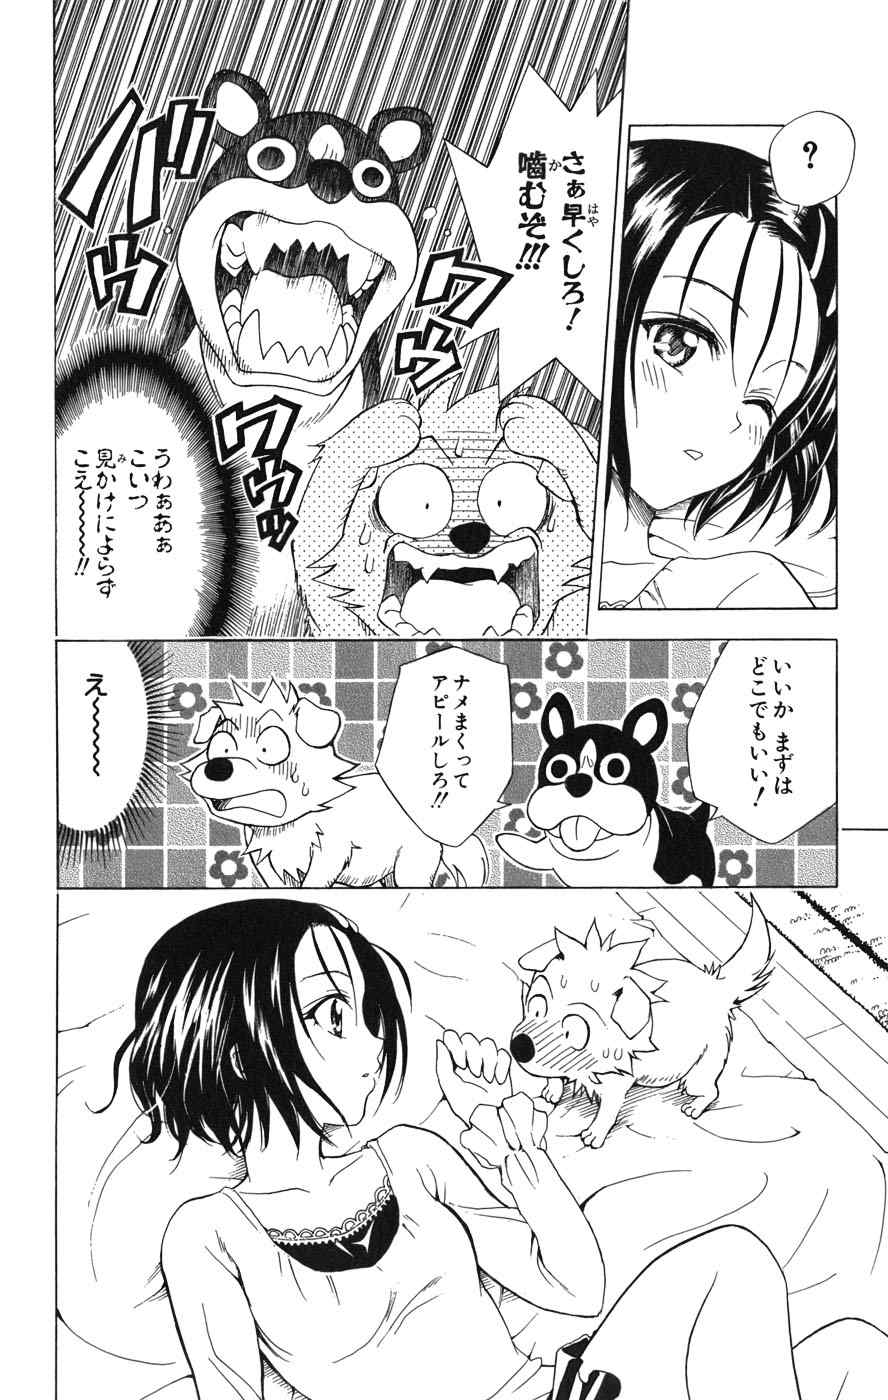 《To LOVEるとらぶる》漫画 To LOVE 06卷